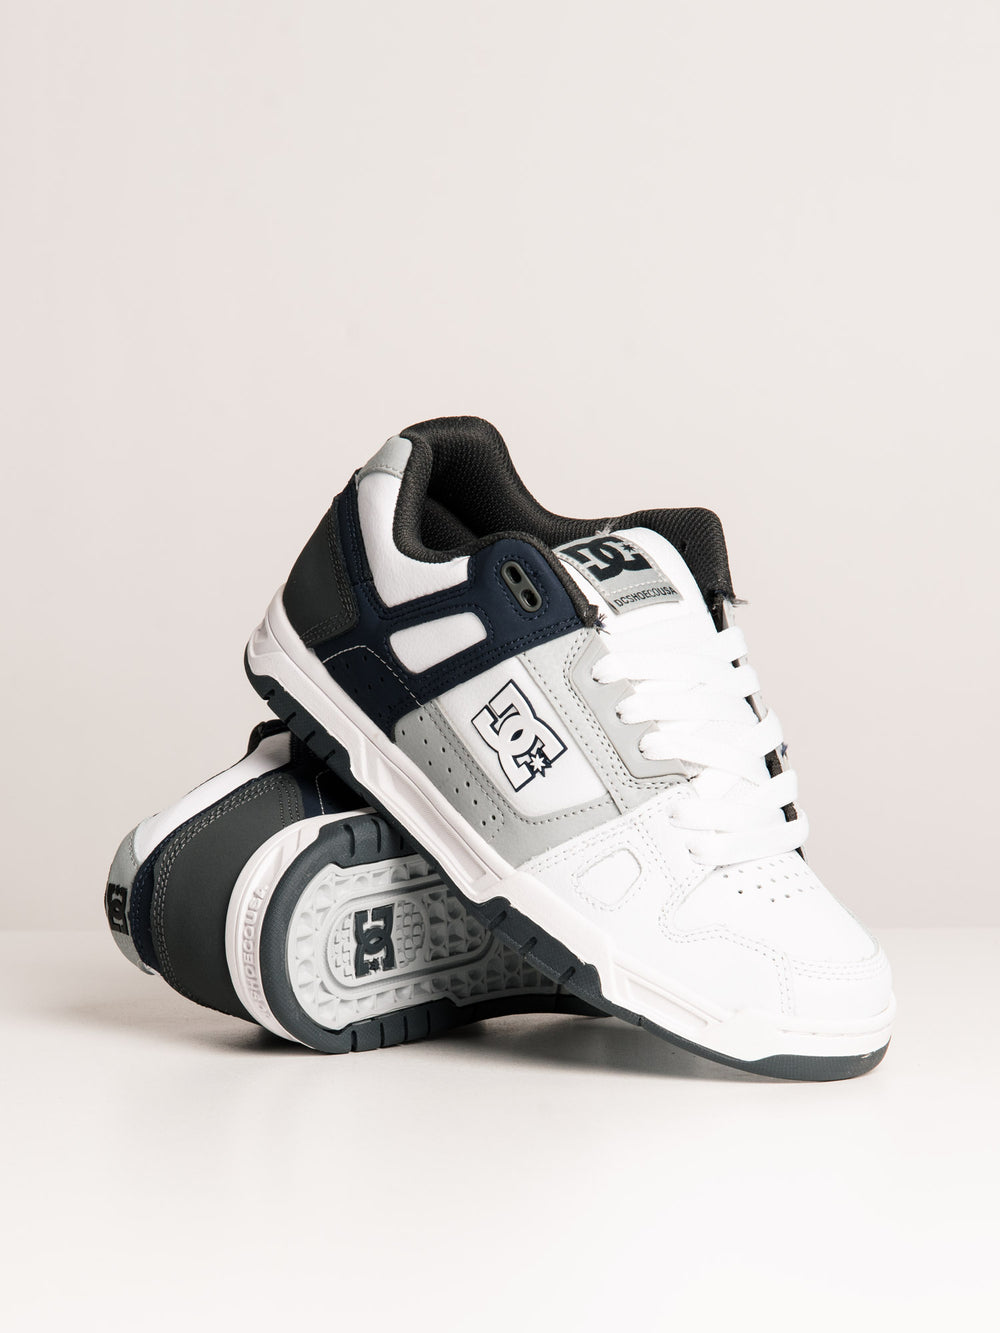 MENS DC SHOES STAG SNEAKER - CLEARANCE